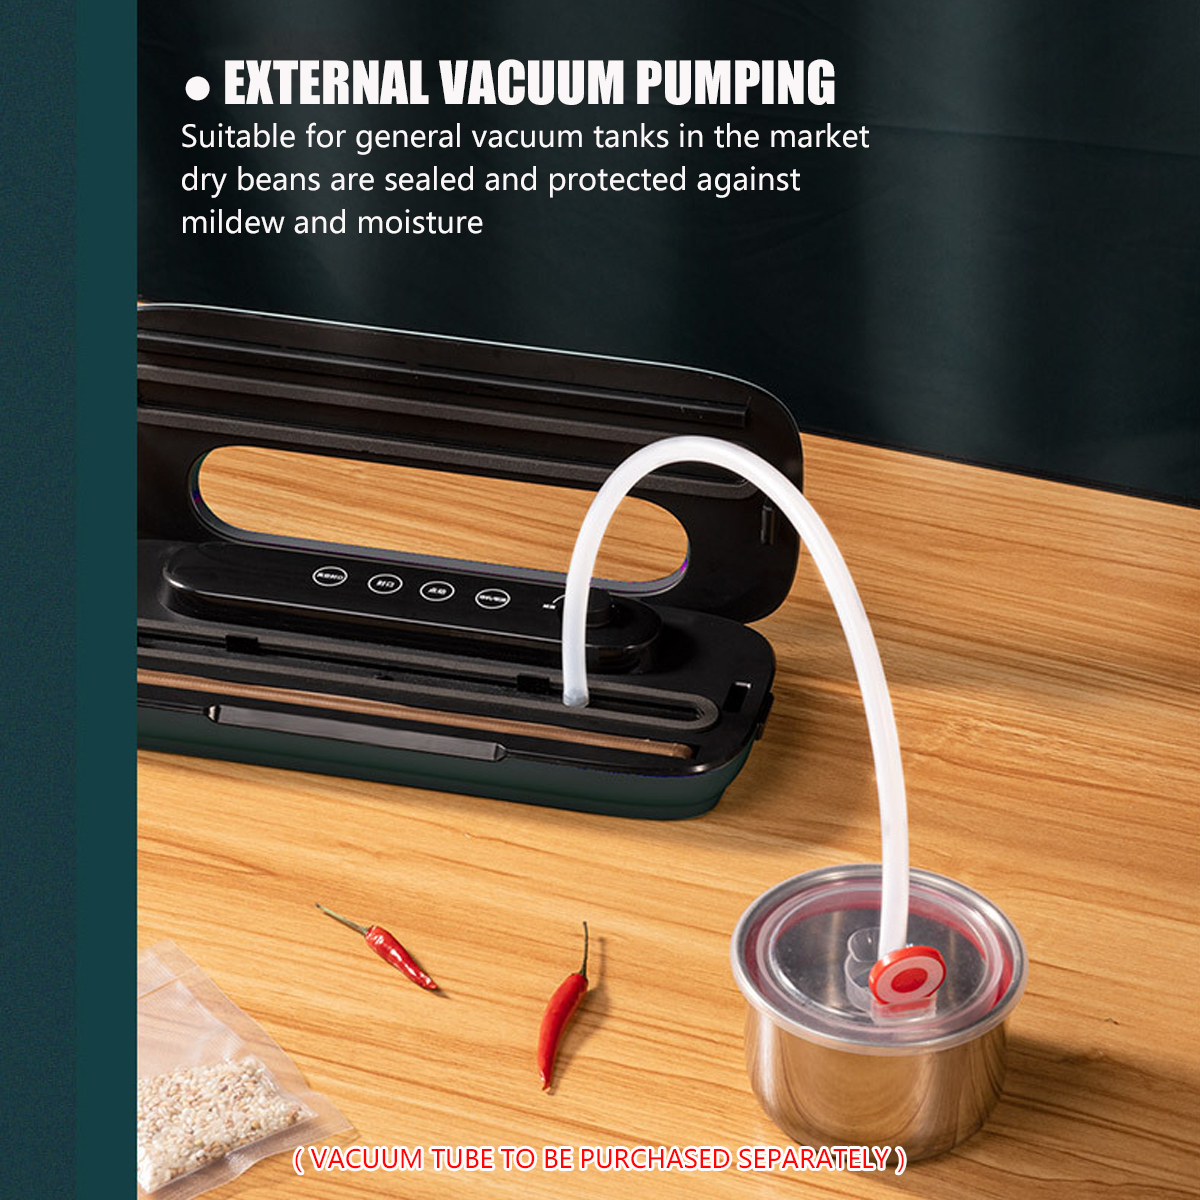 Vacuum-Sealer-Machine-Full-Automatic-Food-Sealer-Air-Sealing-System-for-Food-Storage-3-Functions-Ove-1928369-4